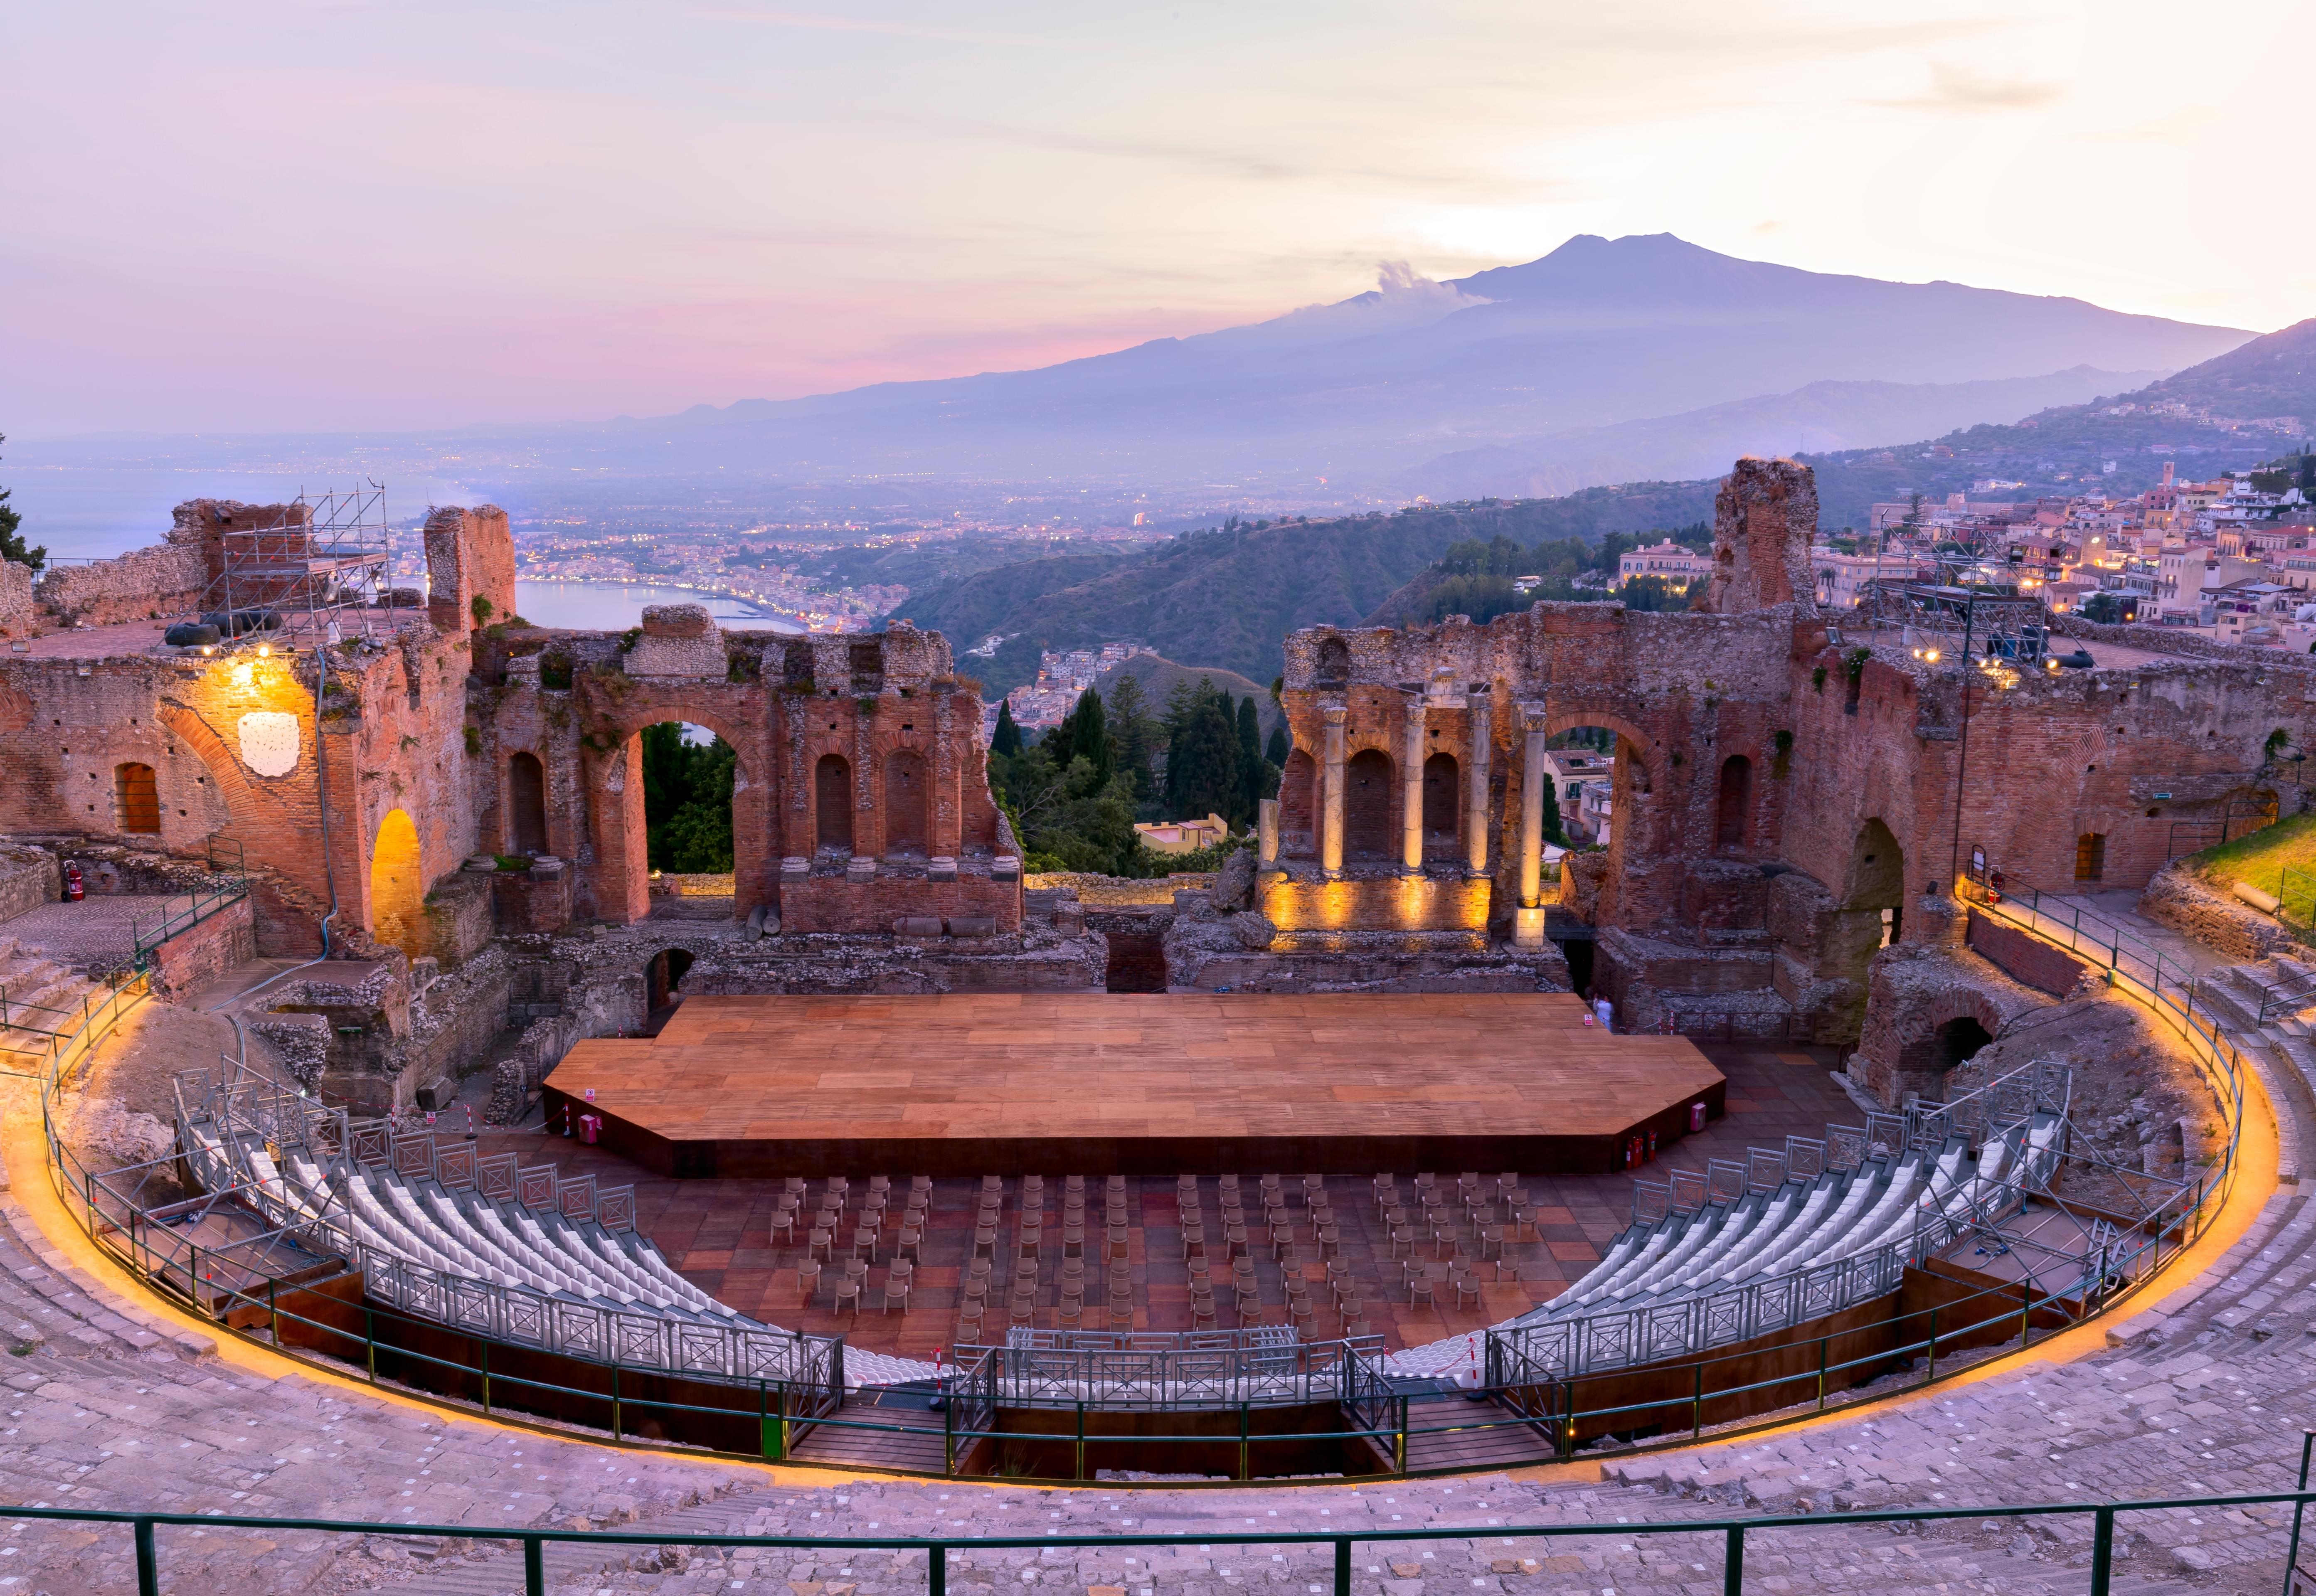 Plan your visit to the magnificent Ancient Theater of Taormina